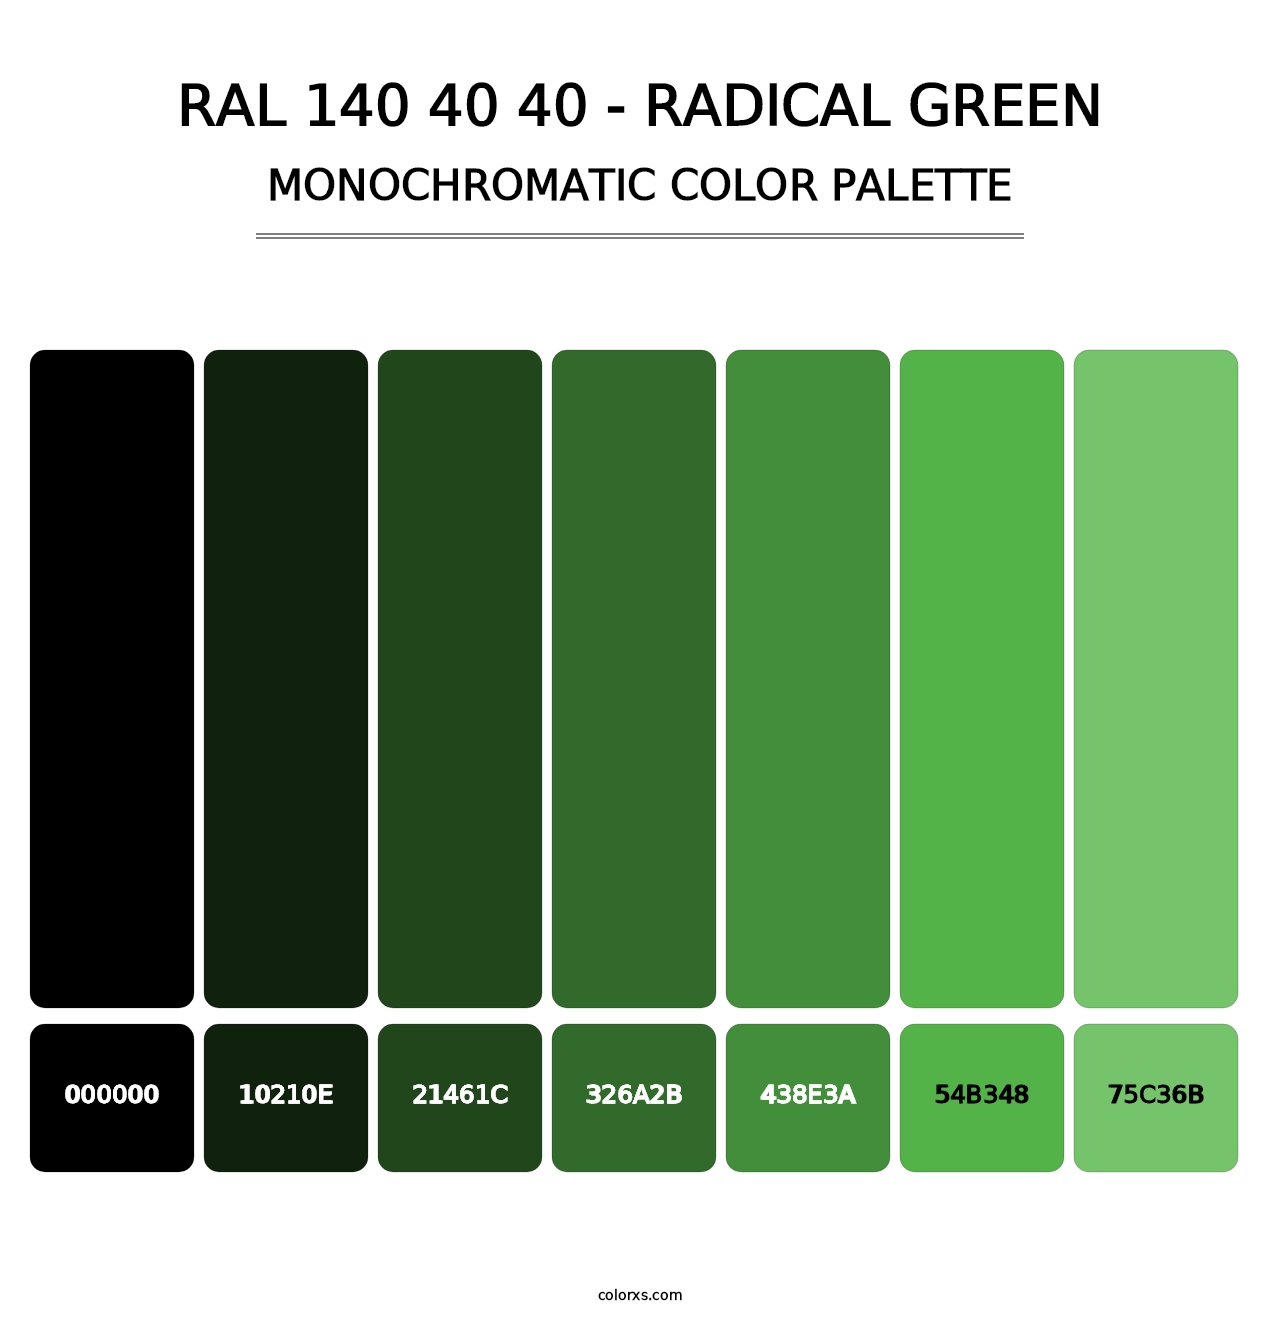 RAL 140 40 40 - Radical Green - Monochromatic Color Palette